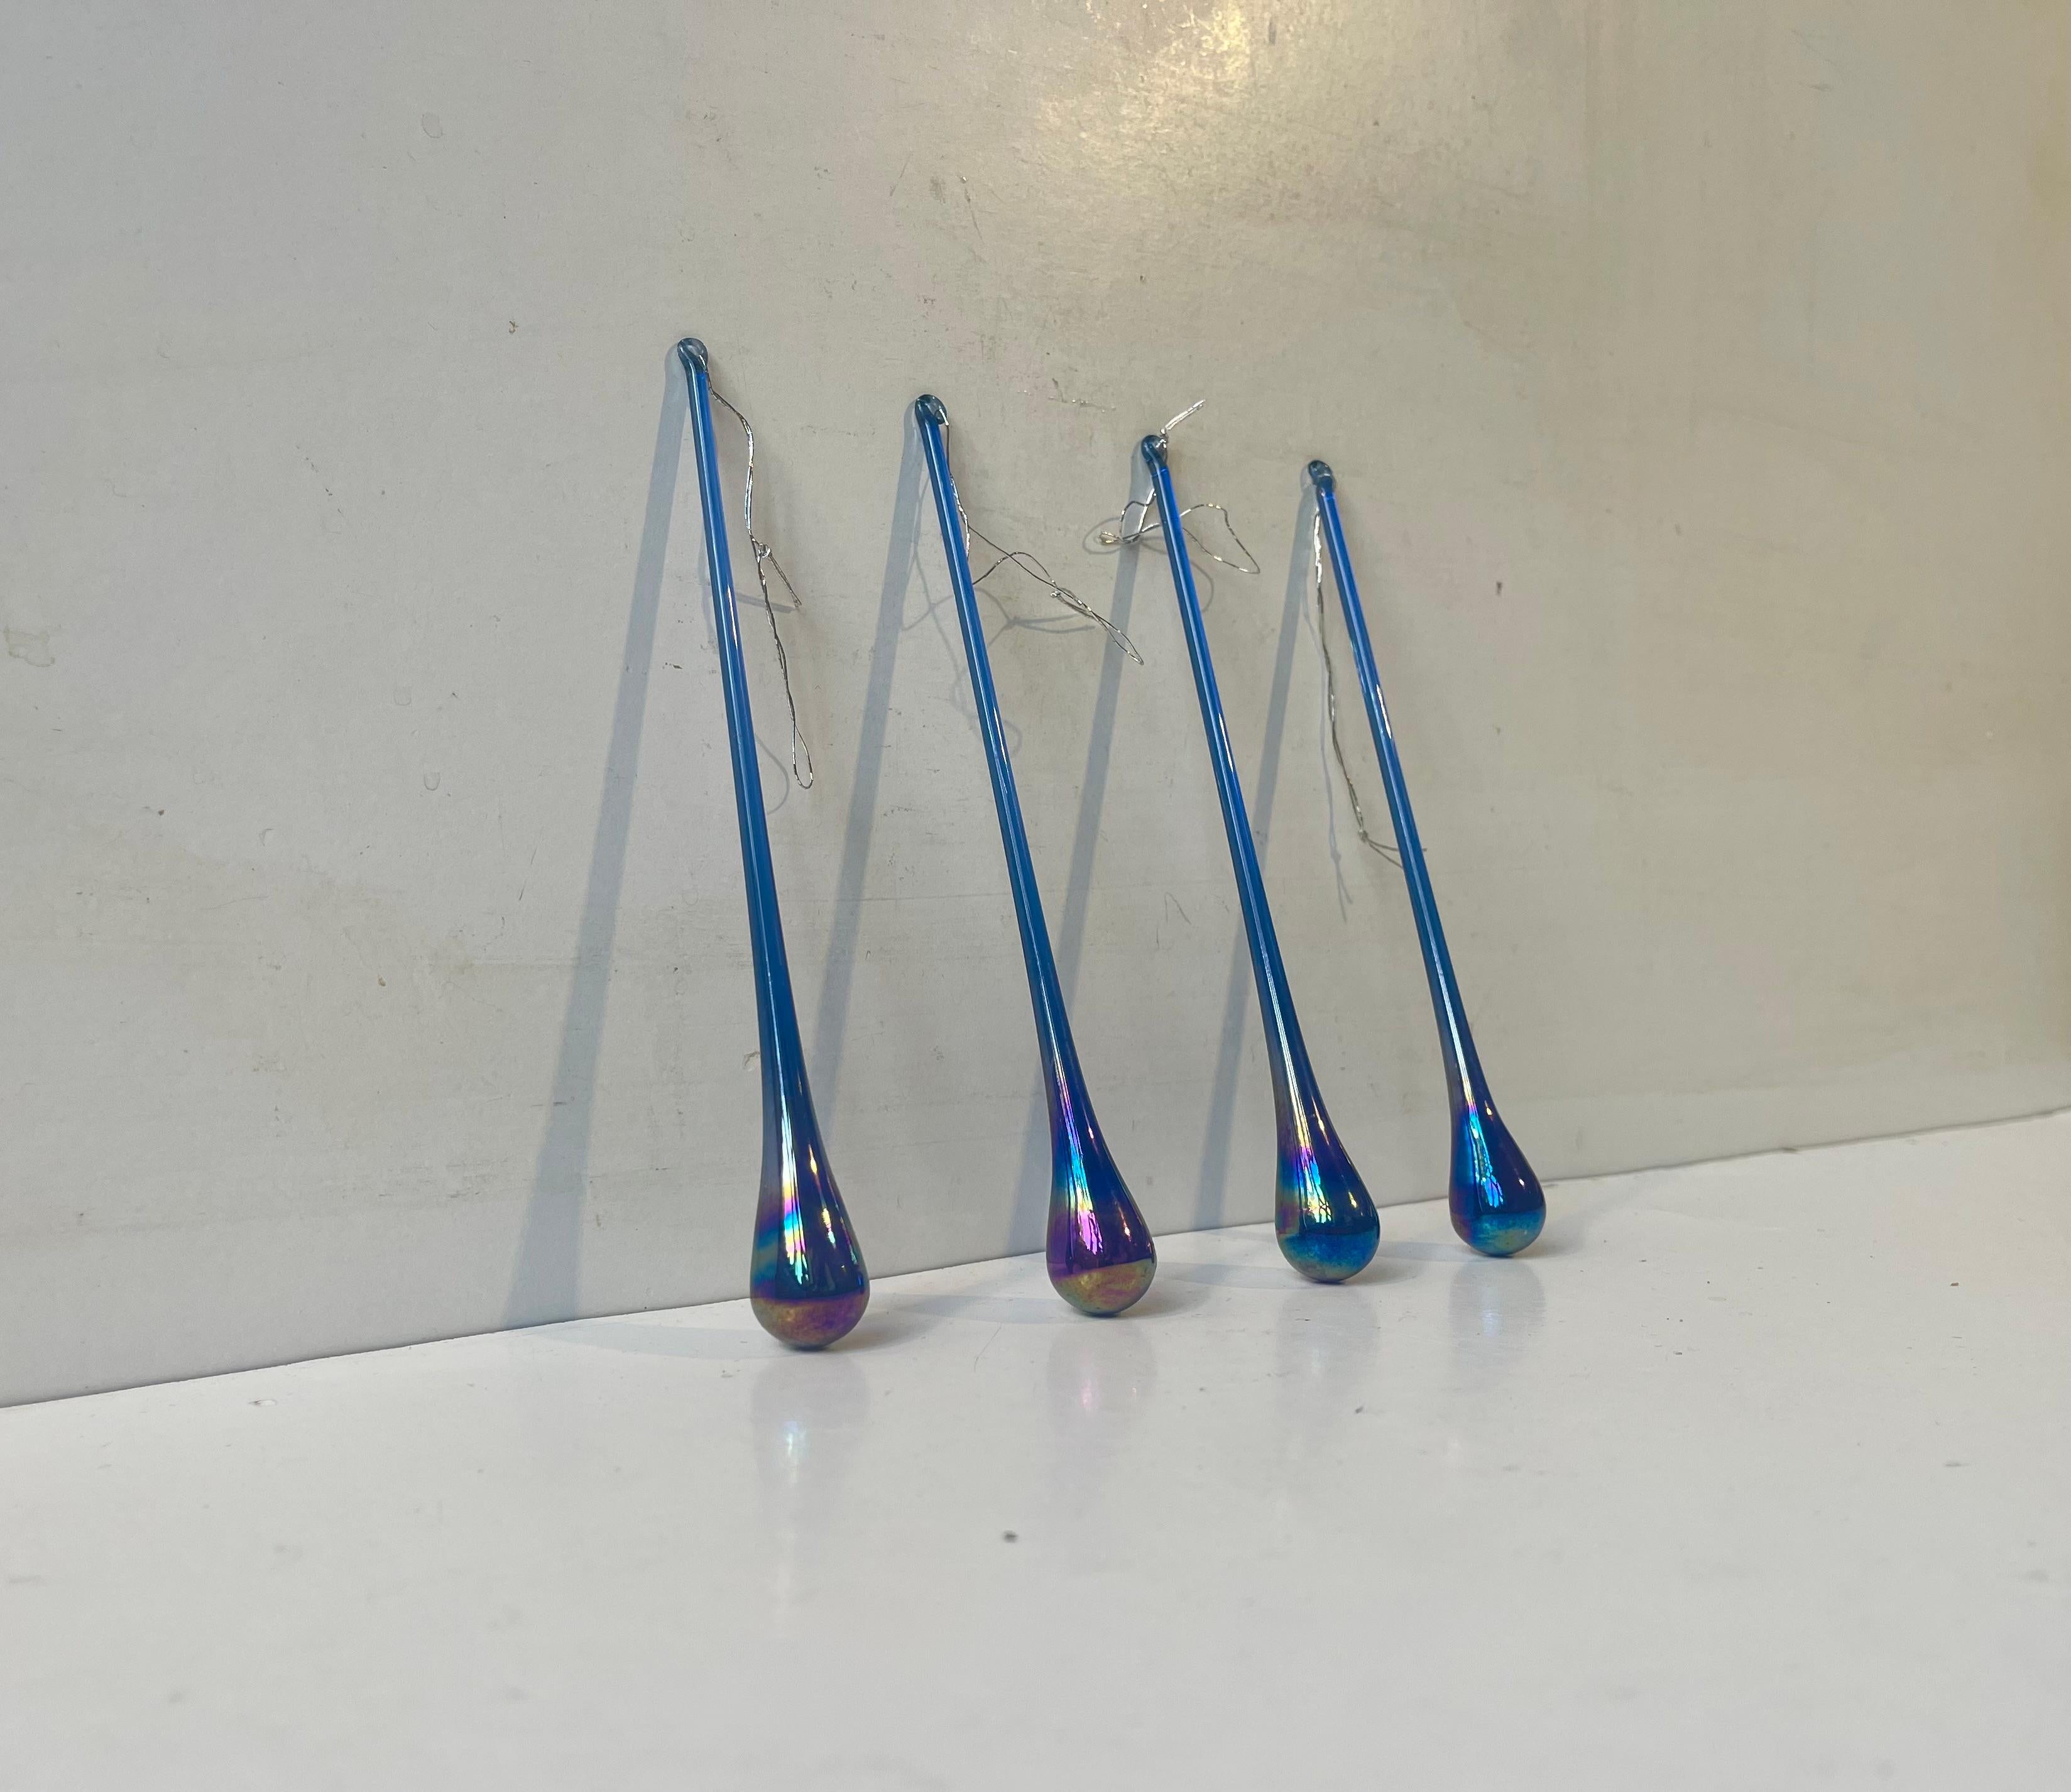 A set of 4 teardrop shaped glass ornaments or suncatchers in irredesent cobalt blue glass. Unknown Scandinavian glass maker circa 1970-80. Measurements: H: 15 cm (without string), w/d: 2/2 cm. The price is for the set of 4.